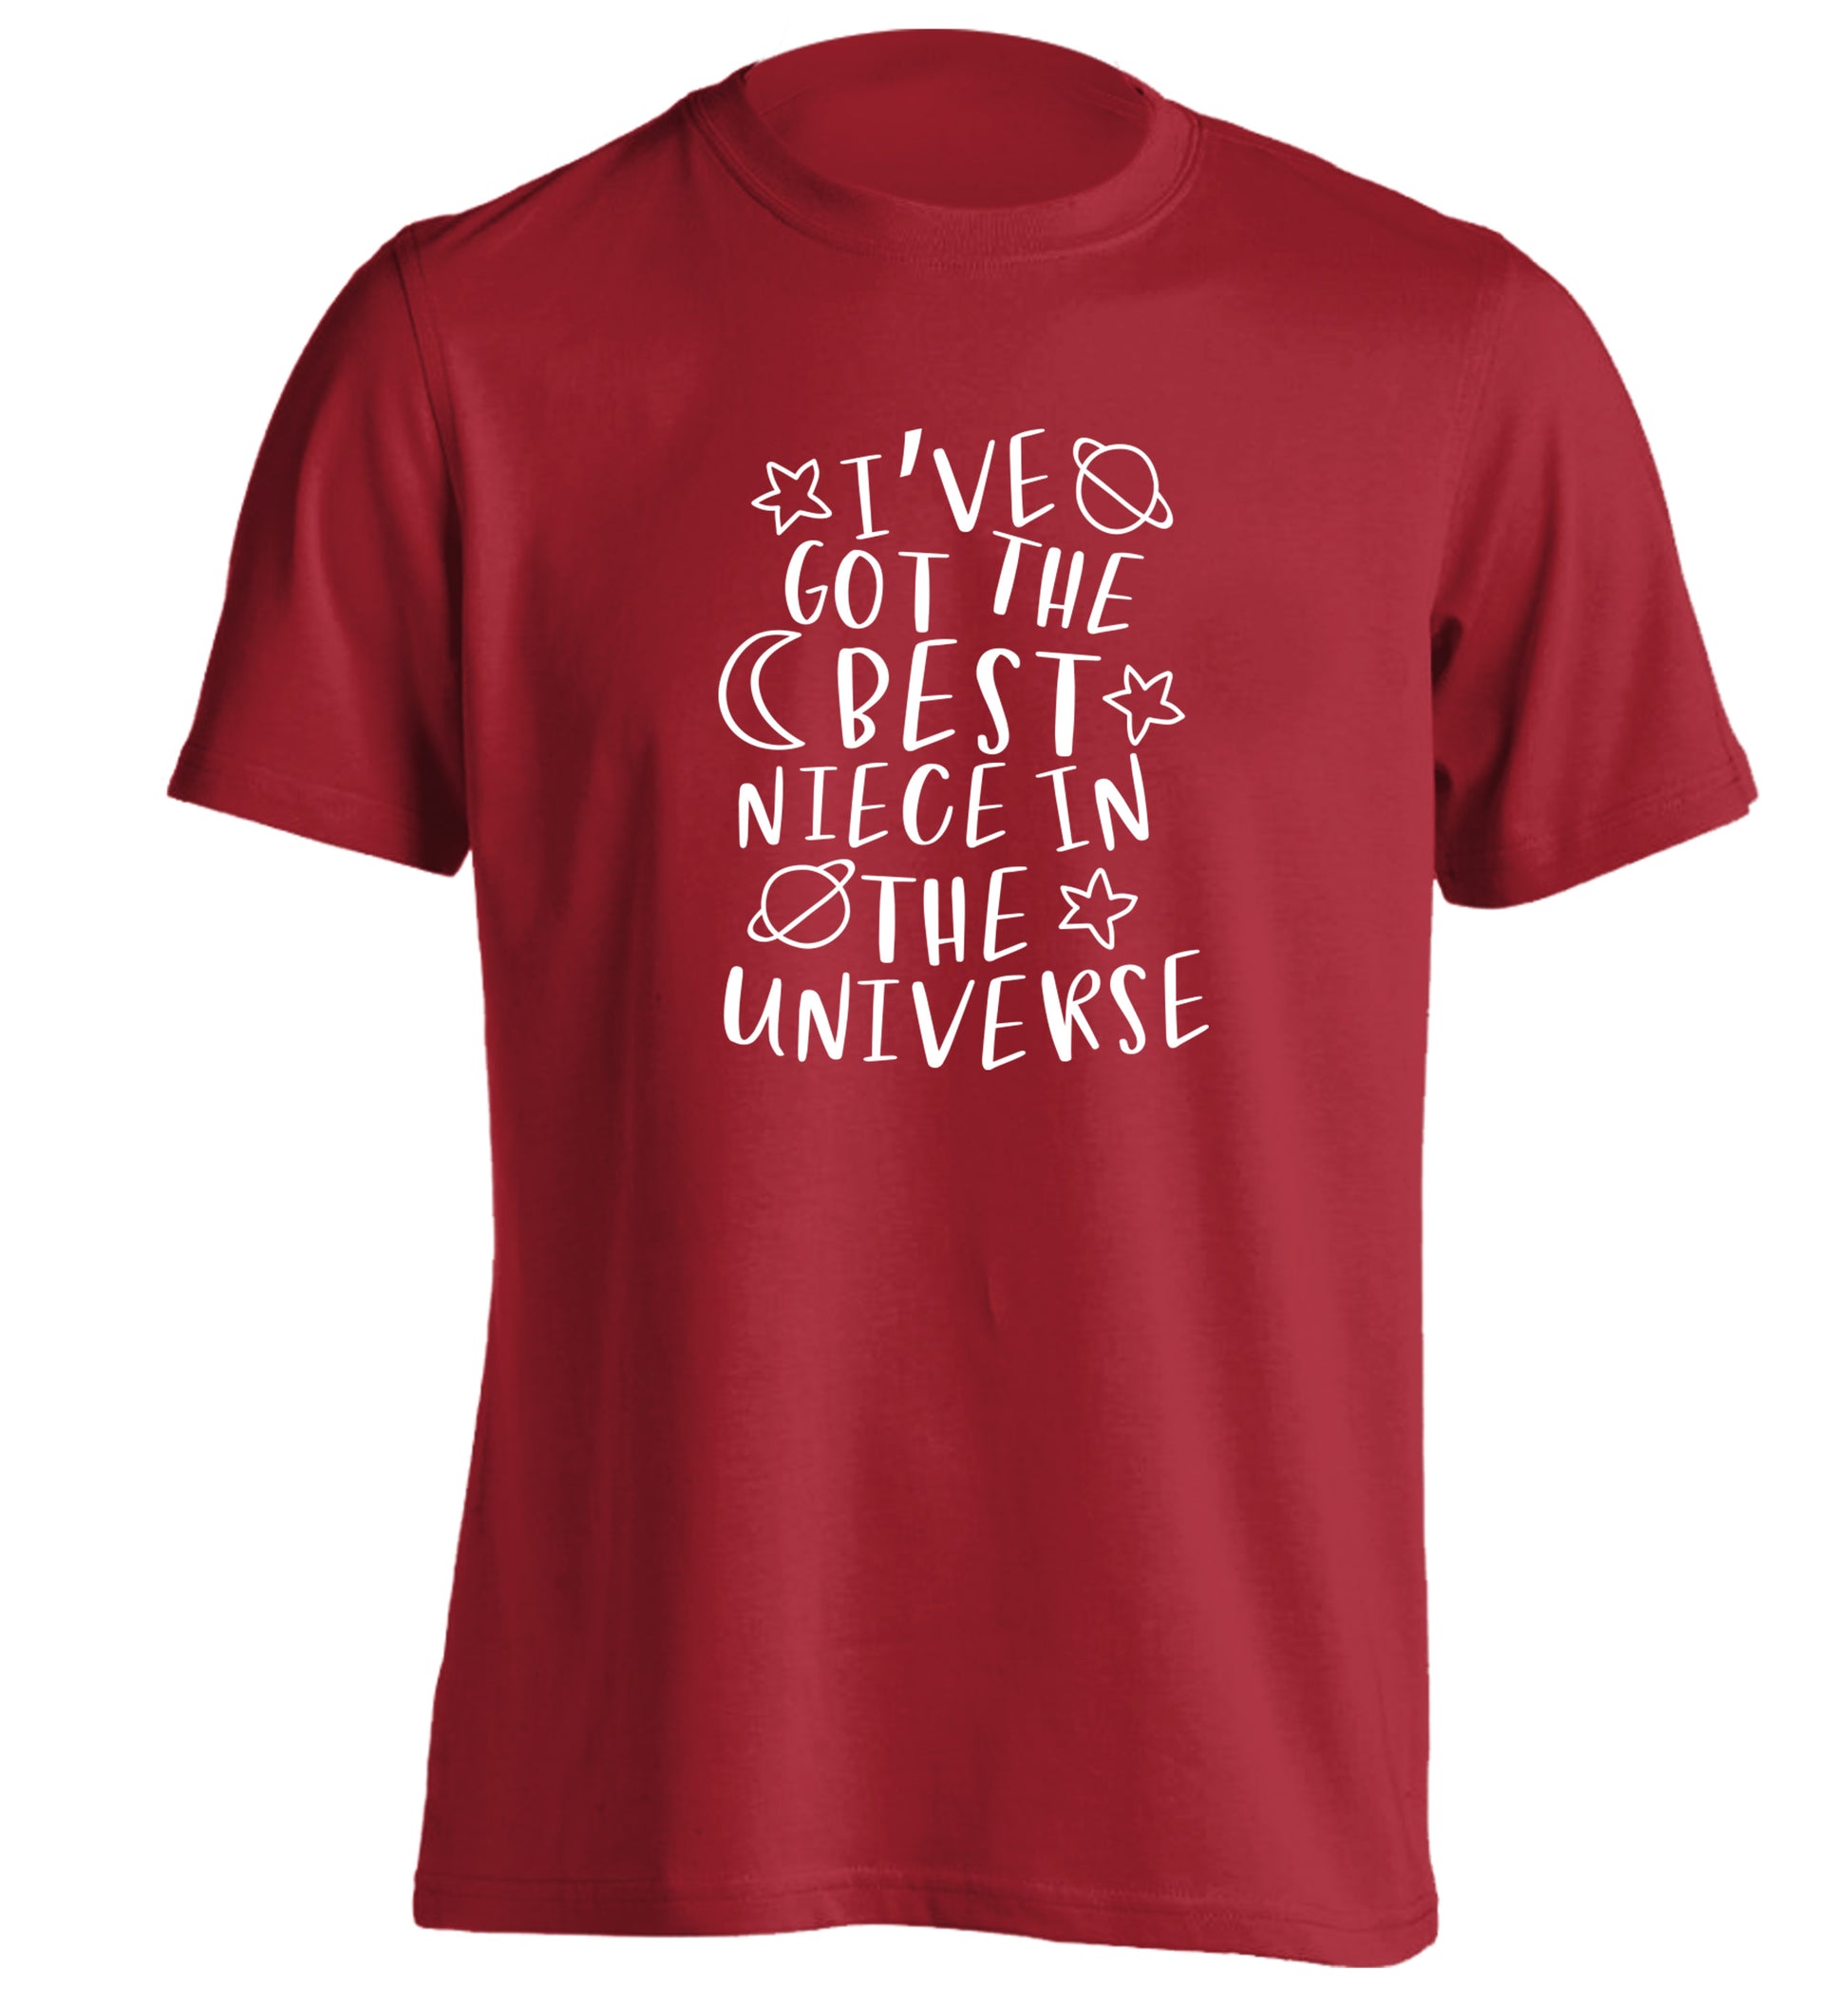 I've got the best niece in the universe adults unisex red Tshirt 2XL